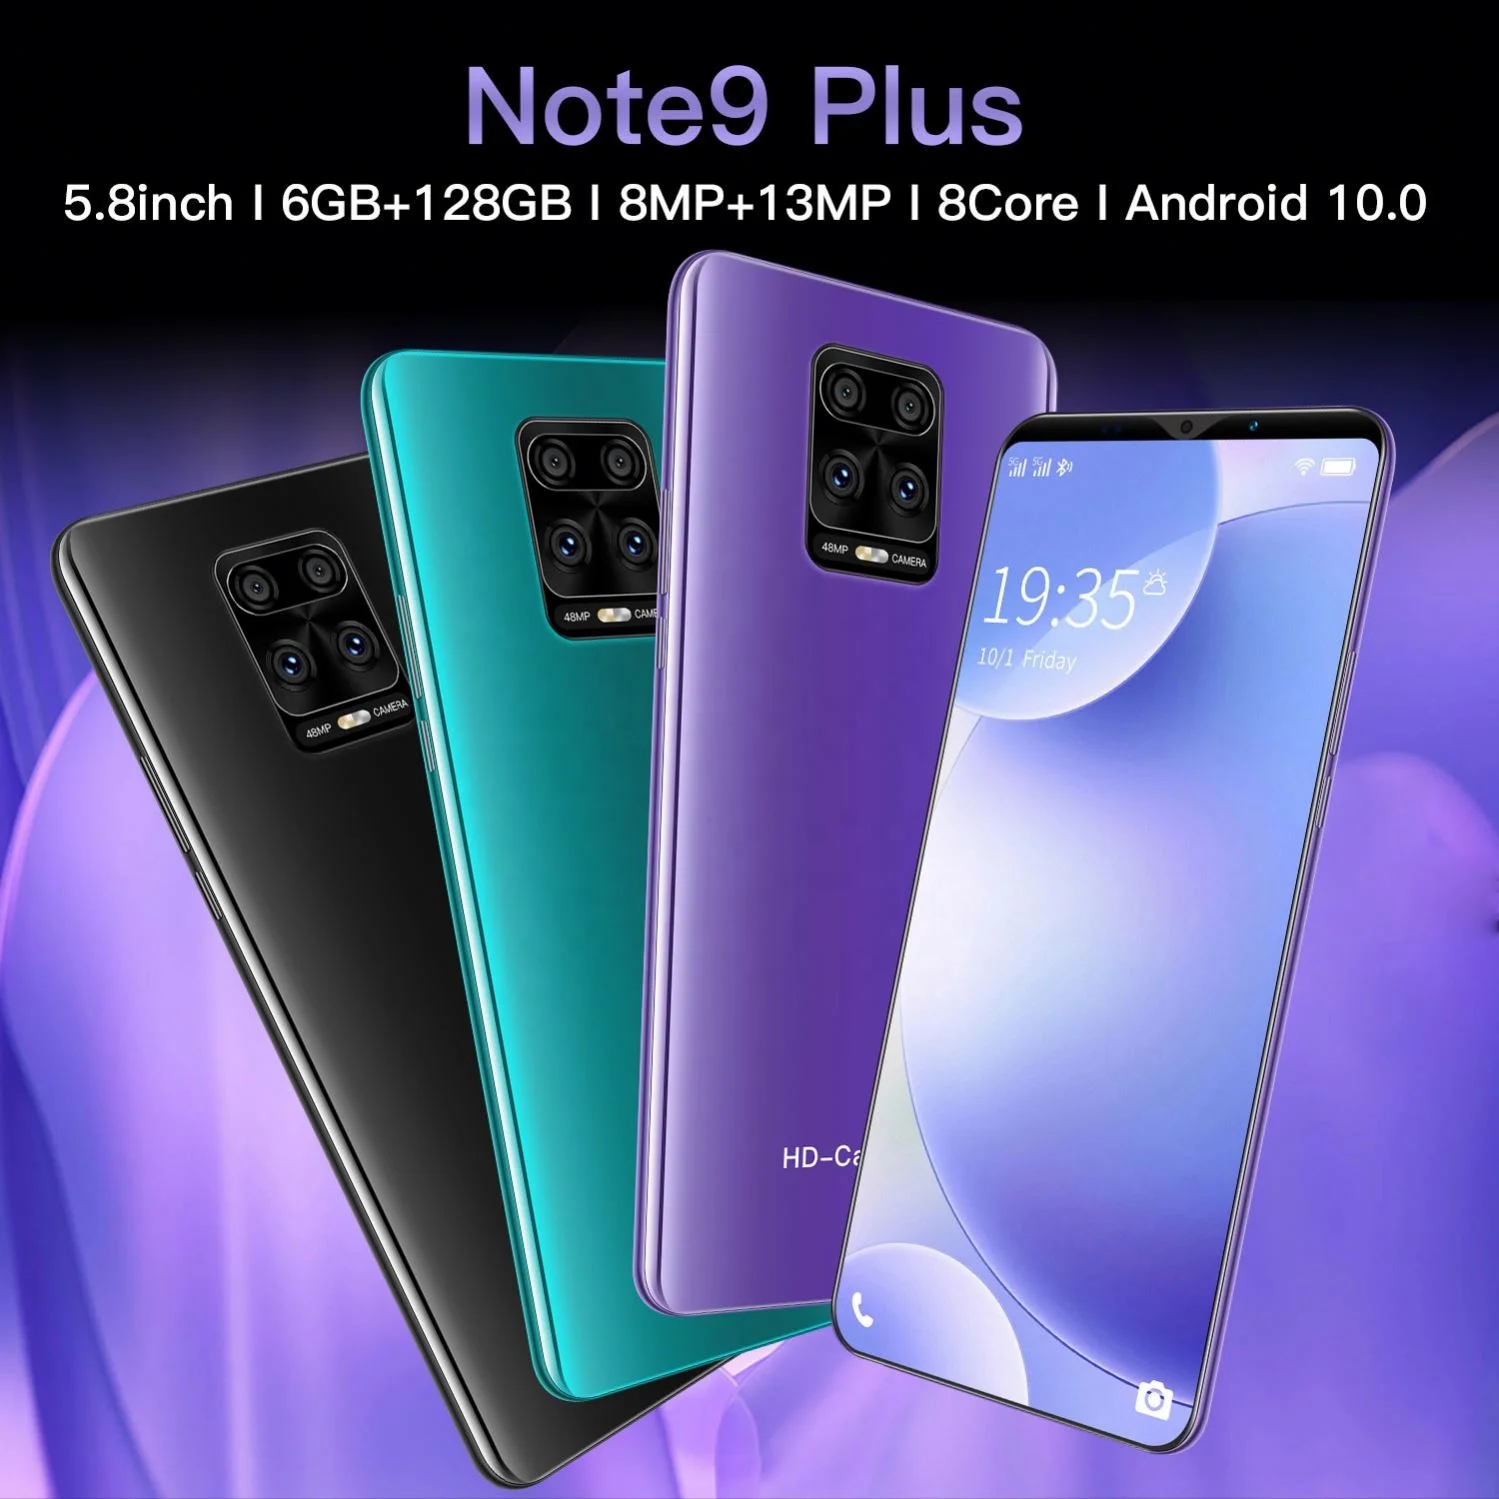 

Wholesale Note9 Plus 4GB+64GB 5.8 inch 4800mAh feature luxury mobail unlocked 4G Android Smart Mobile Phones, Blue/purple/black